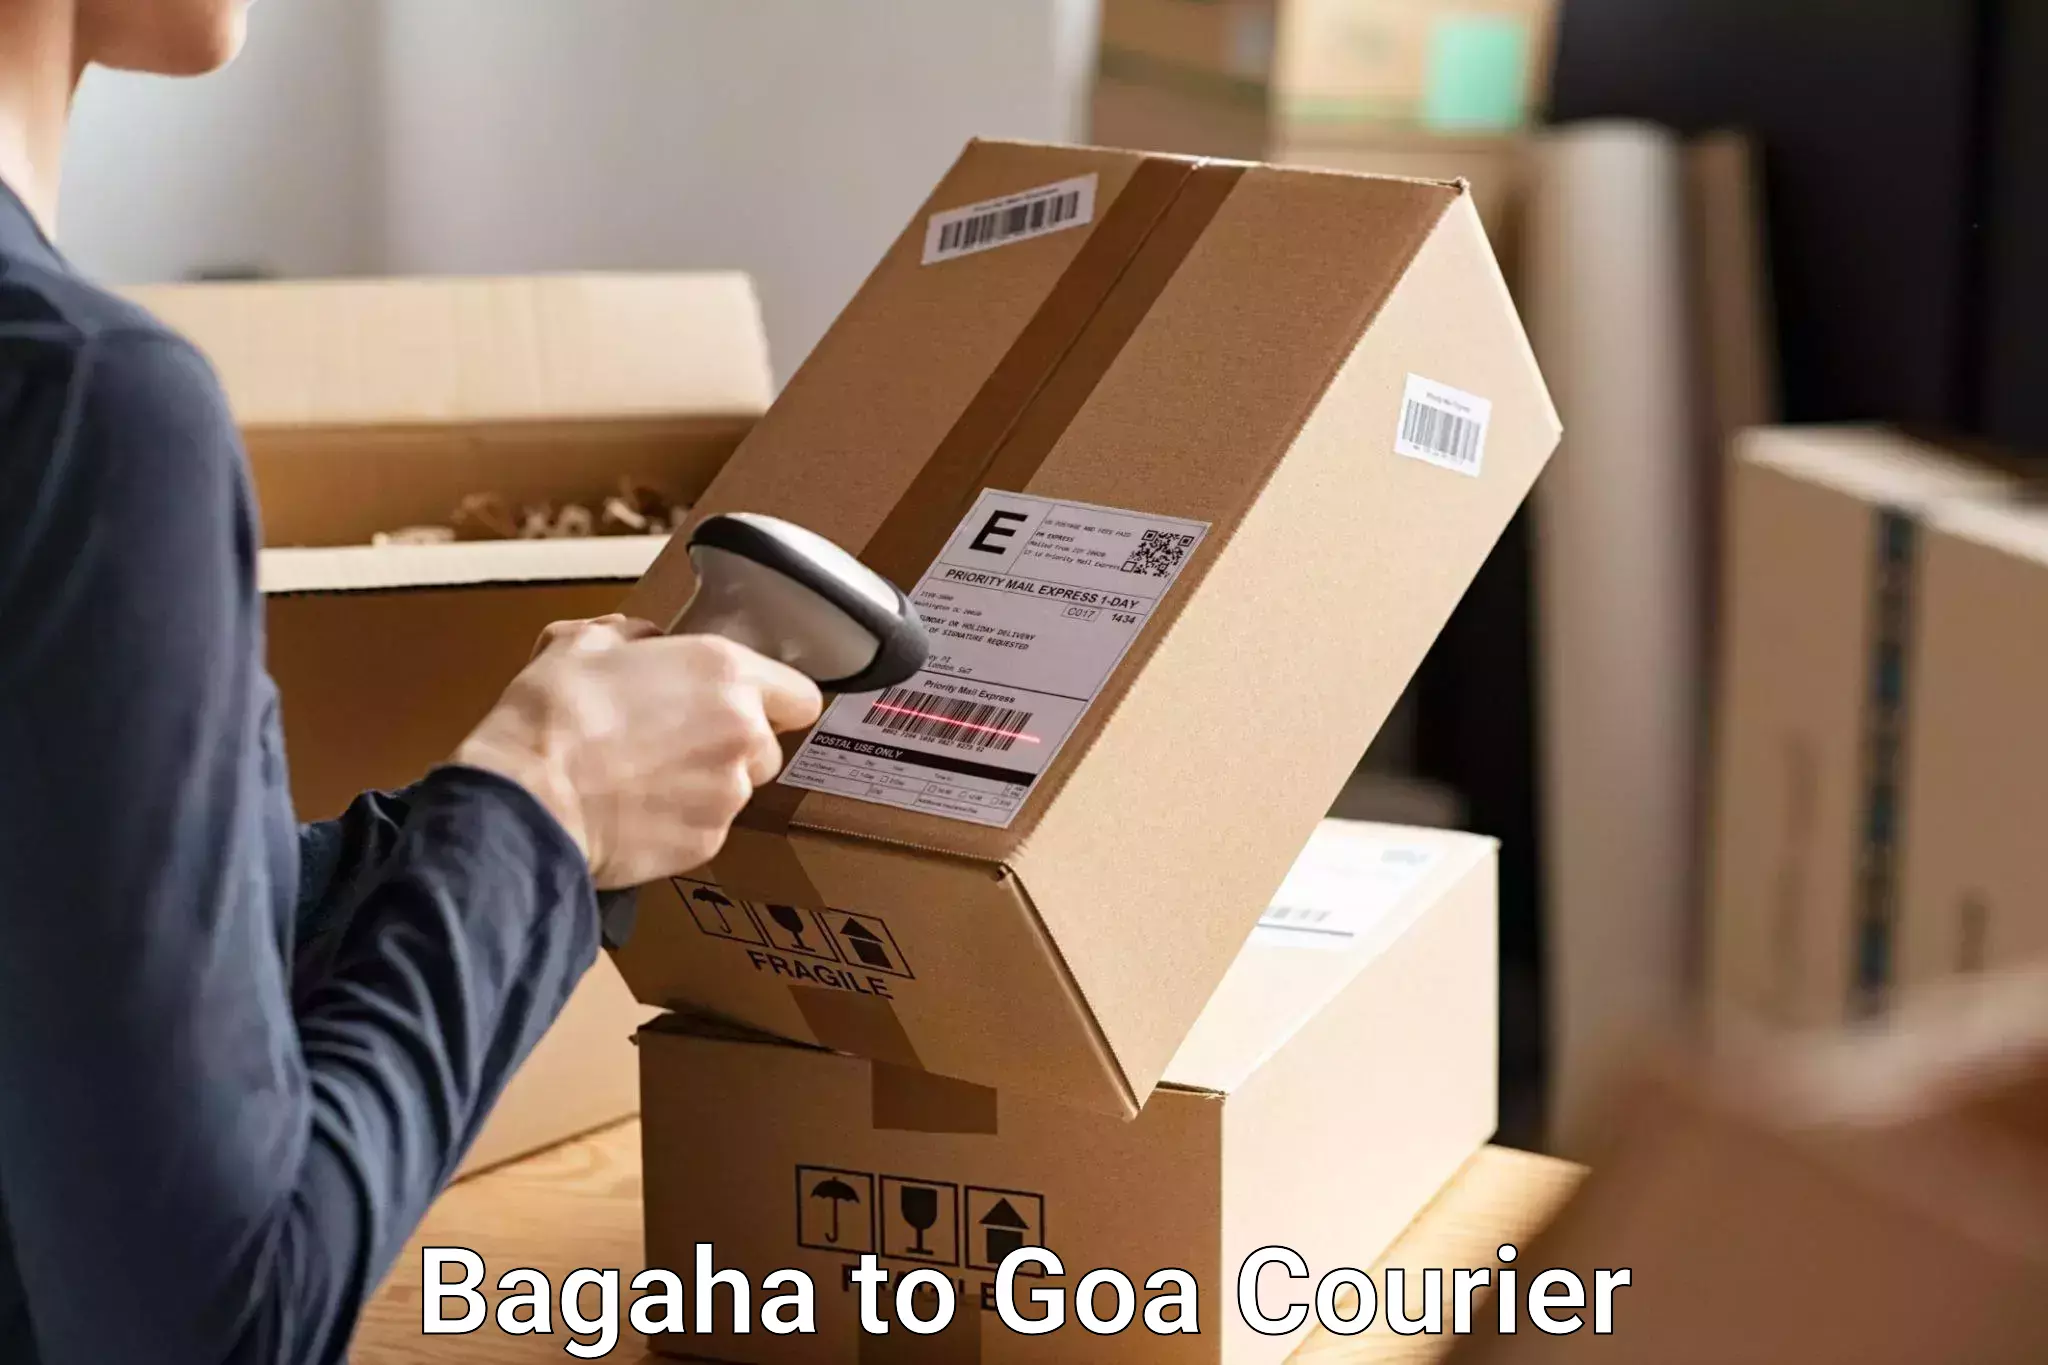 Baggage transport services Bagaha to Goa